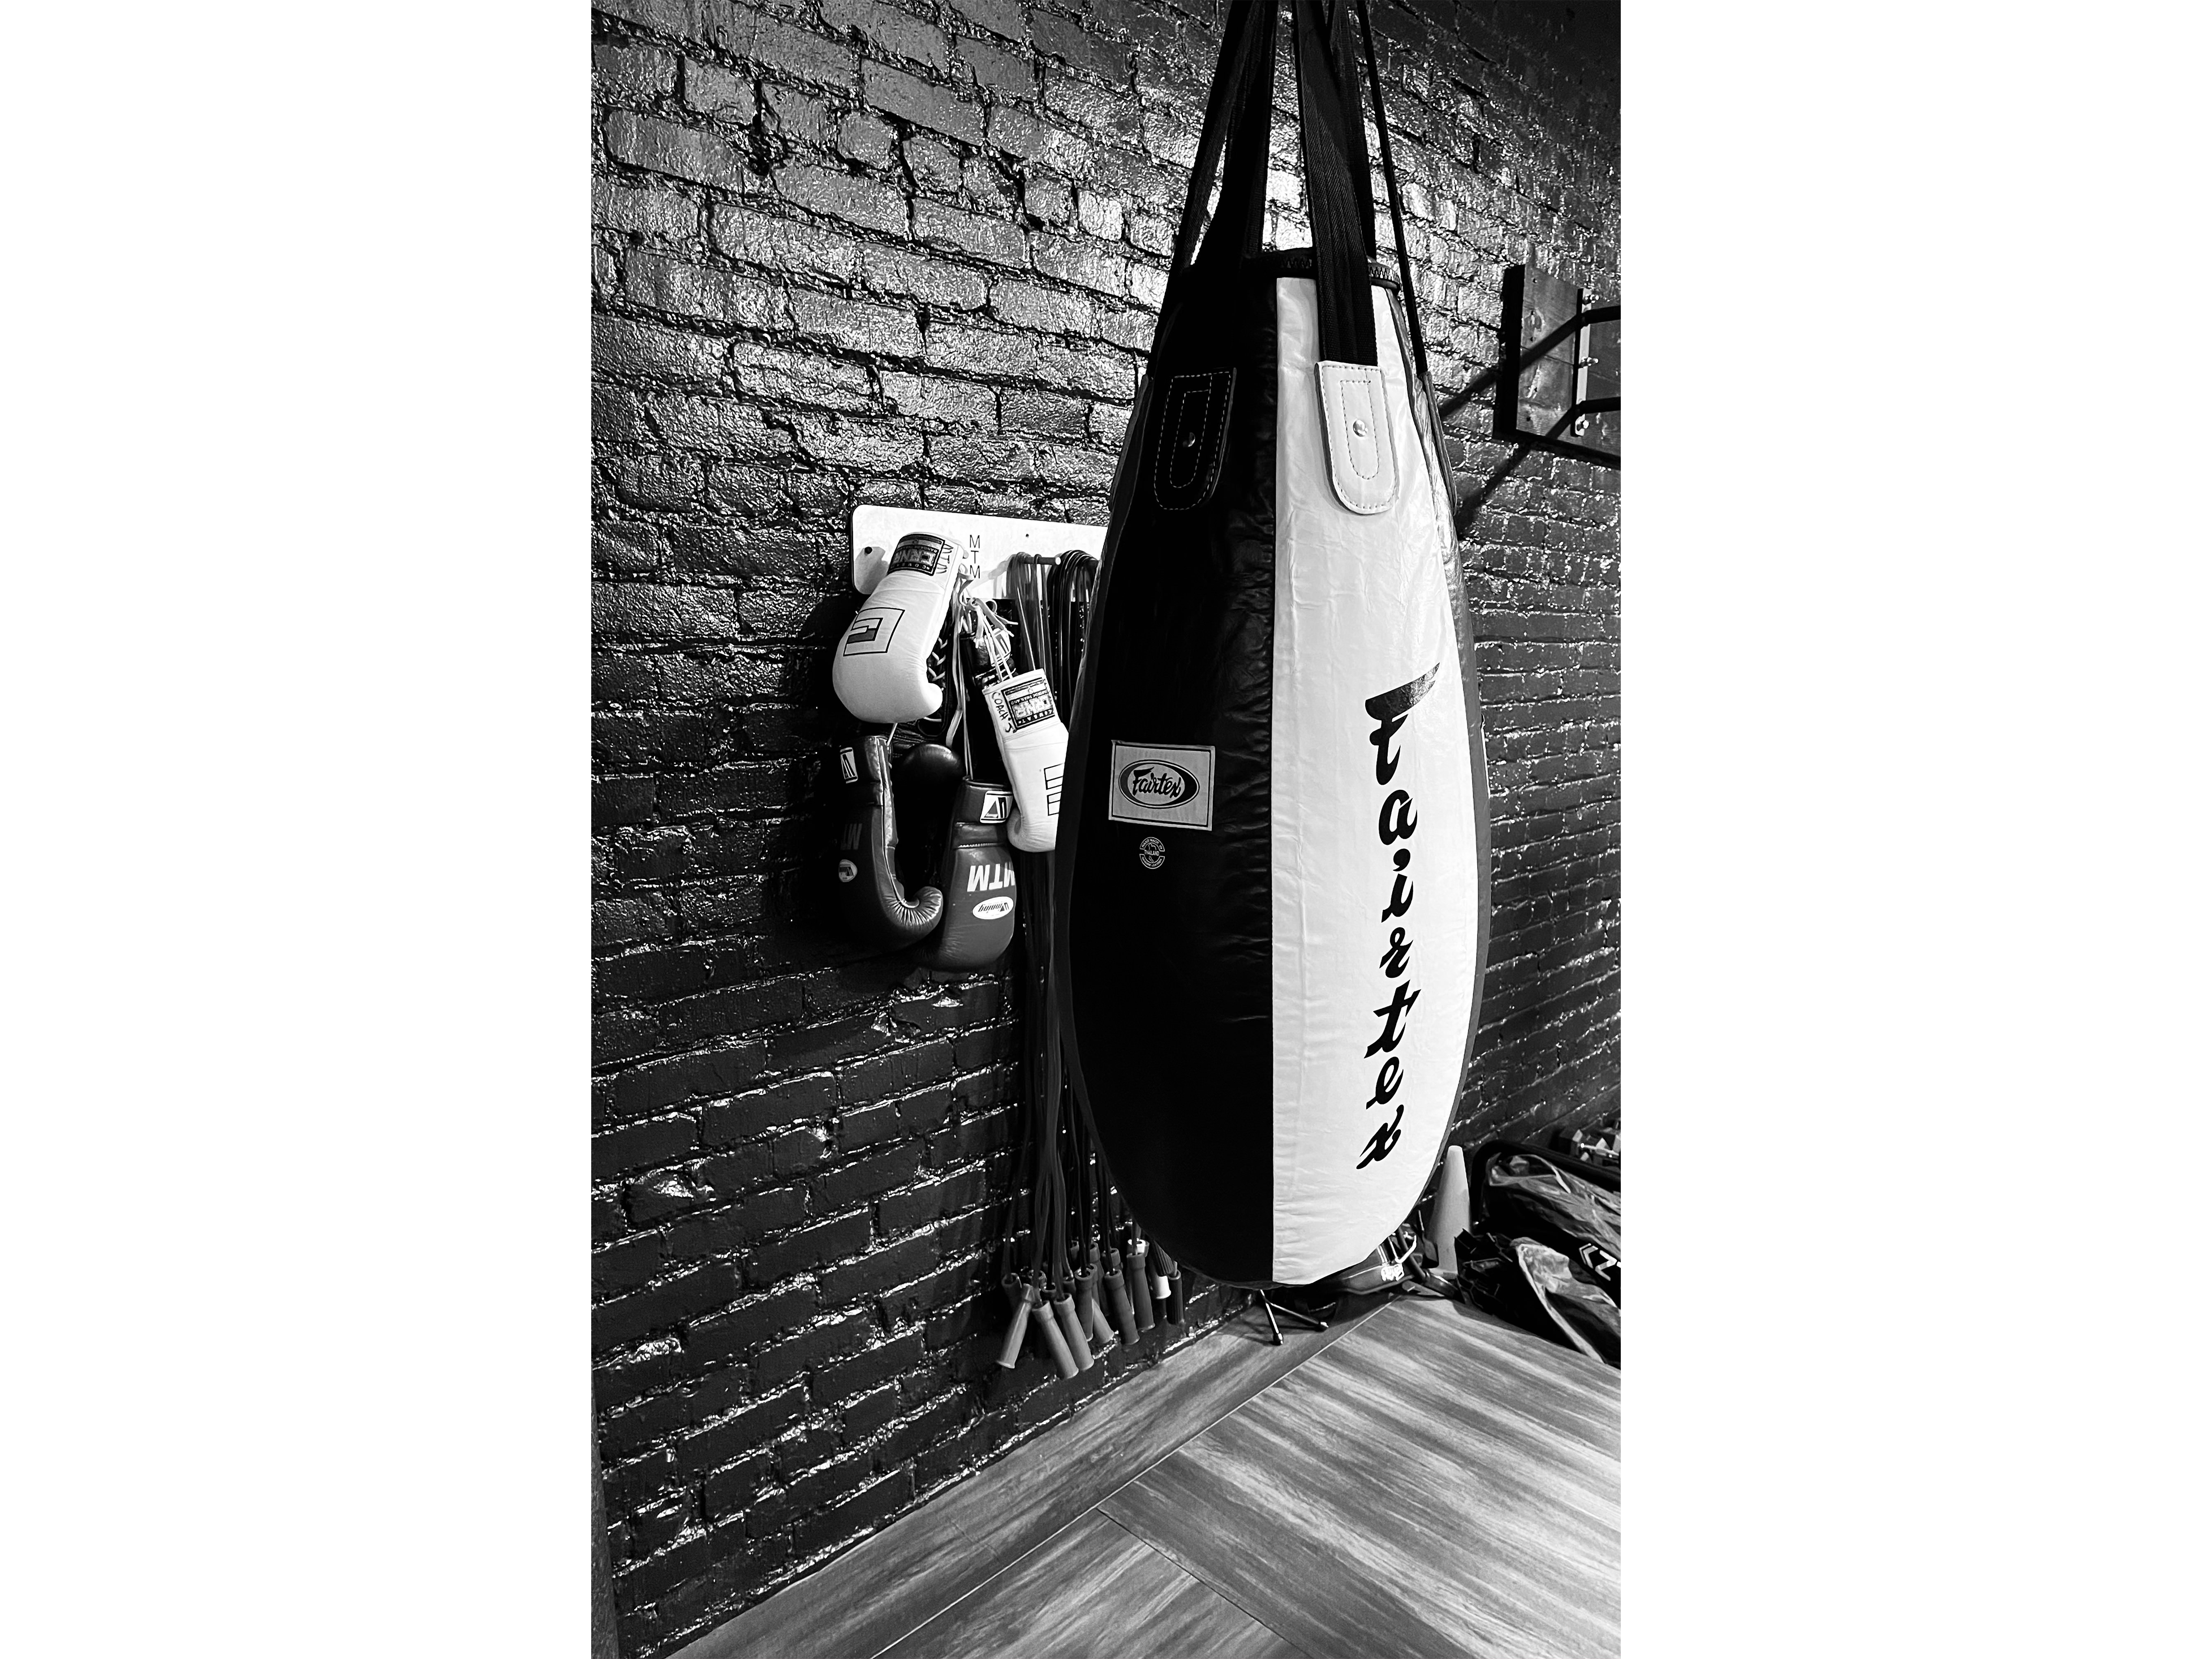  <h1 >BOXING</h1>  In this class, you will not only learn how to use your fists but you will also learn strategy, defense, diversions, and instinct. Boxing improves fitness by building aerobic and
            anaerobic strength, speed and agility, muscular and physical endurance, while also pushing you to endure the strong mental components that this sport requires. This class also requires skill and heart. It’s said that the formula for boxing is: thought + skill + preparation + heart = performance.
            You will be engaged and motivated learning an art, while at the same time, getting in the best shape of your life. 